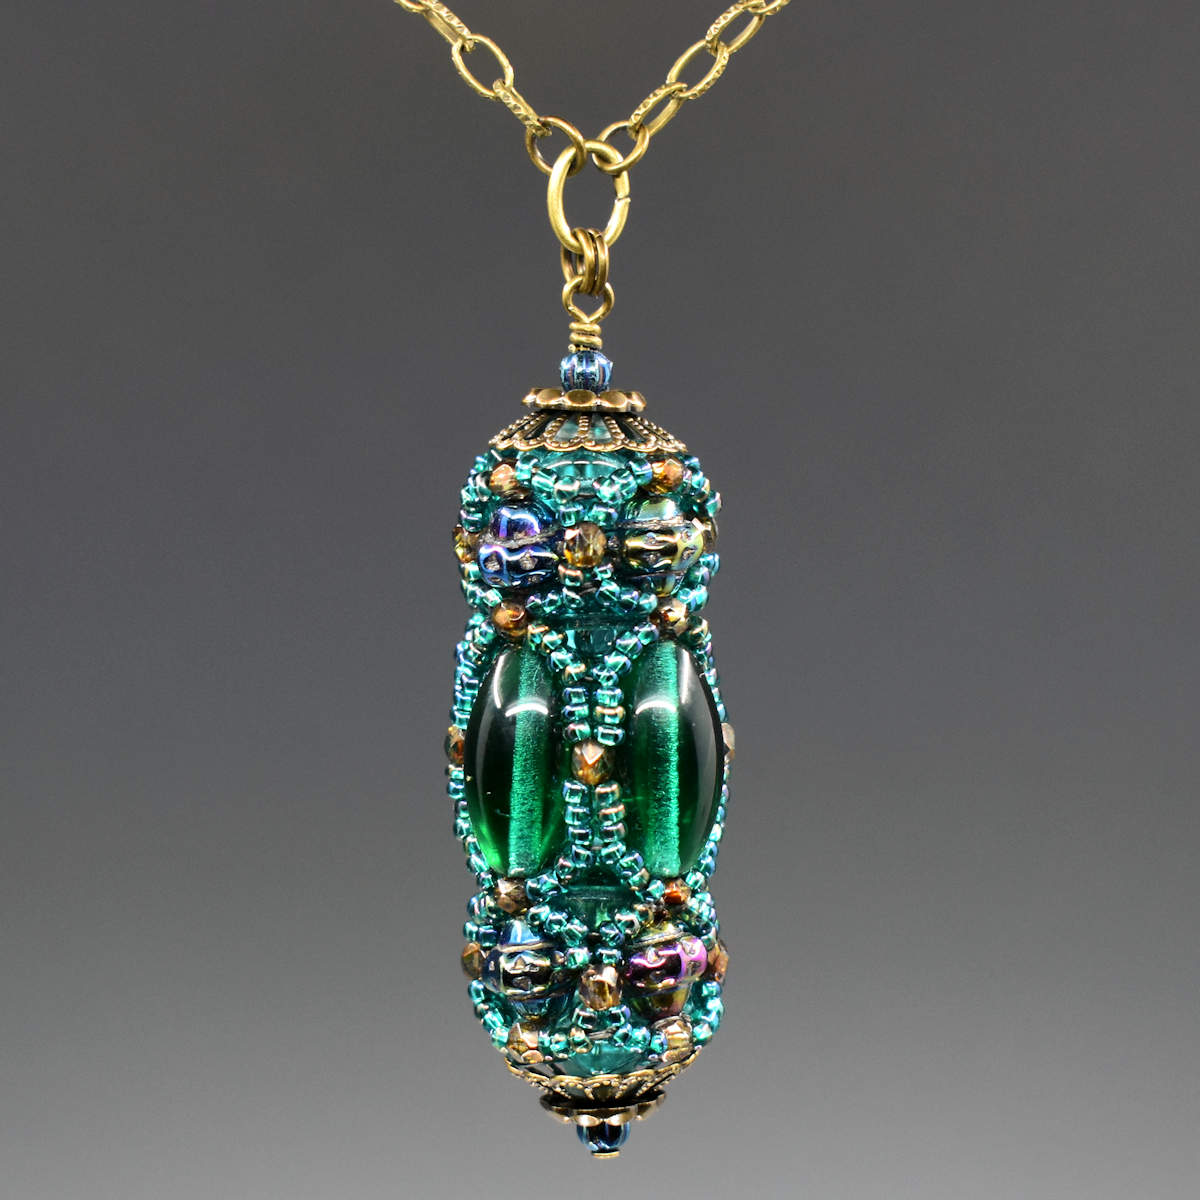 A turquoise and green beaded pendant hangs from a gold colored chain. The pendant has long oval beads that form the center row and textured iridescent beads that form a decorative top and bottom row. A netting of translucent peacock green seed beads is overlaid, outlining all of the larger beads. 